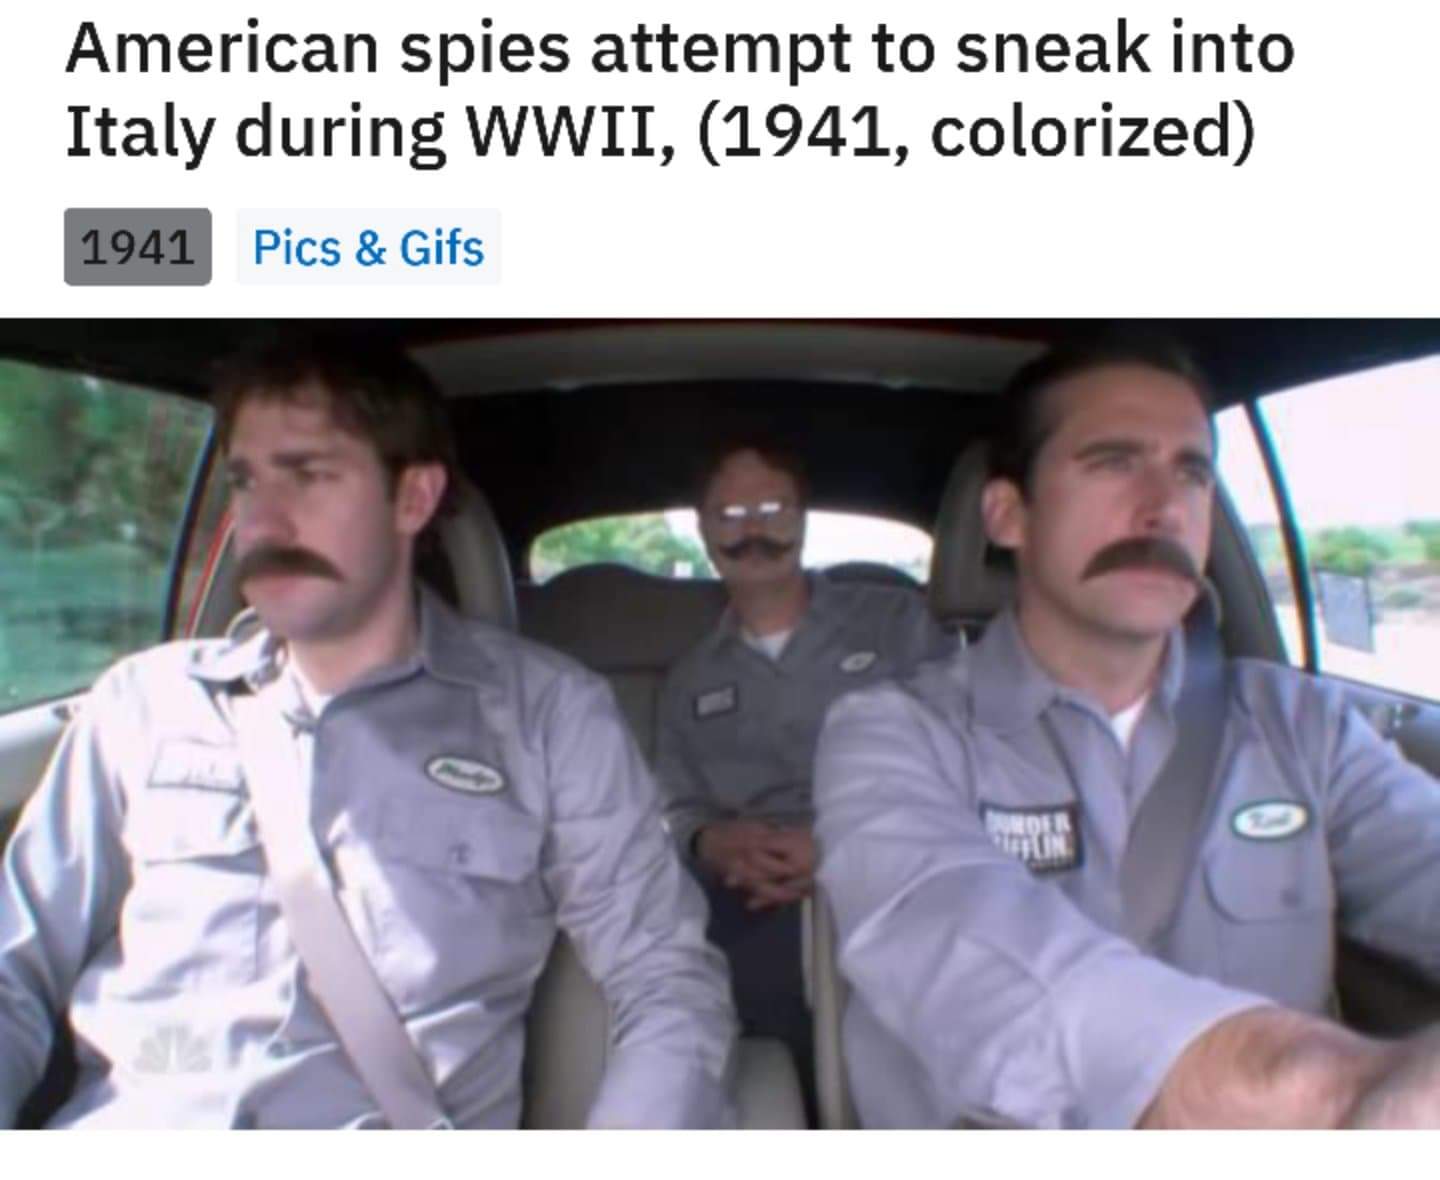 the office - area 51 memes - American spies attempt to sneak into Italy during Wwii, 1941, colorized 1941 Pics & Gifs